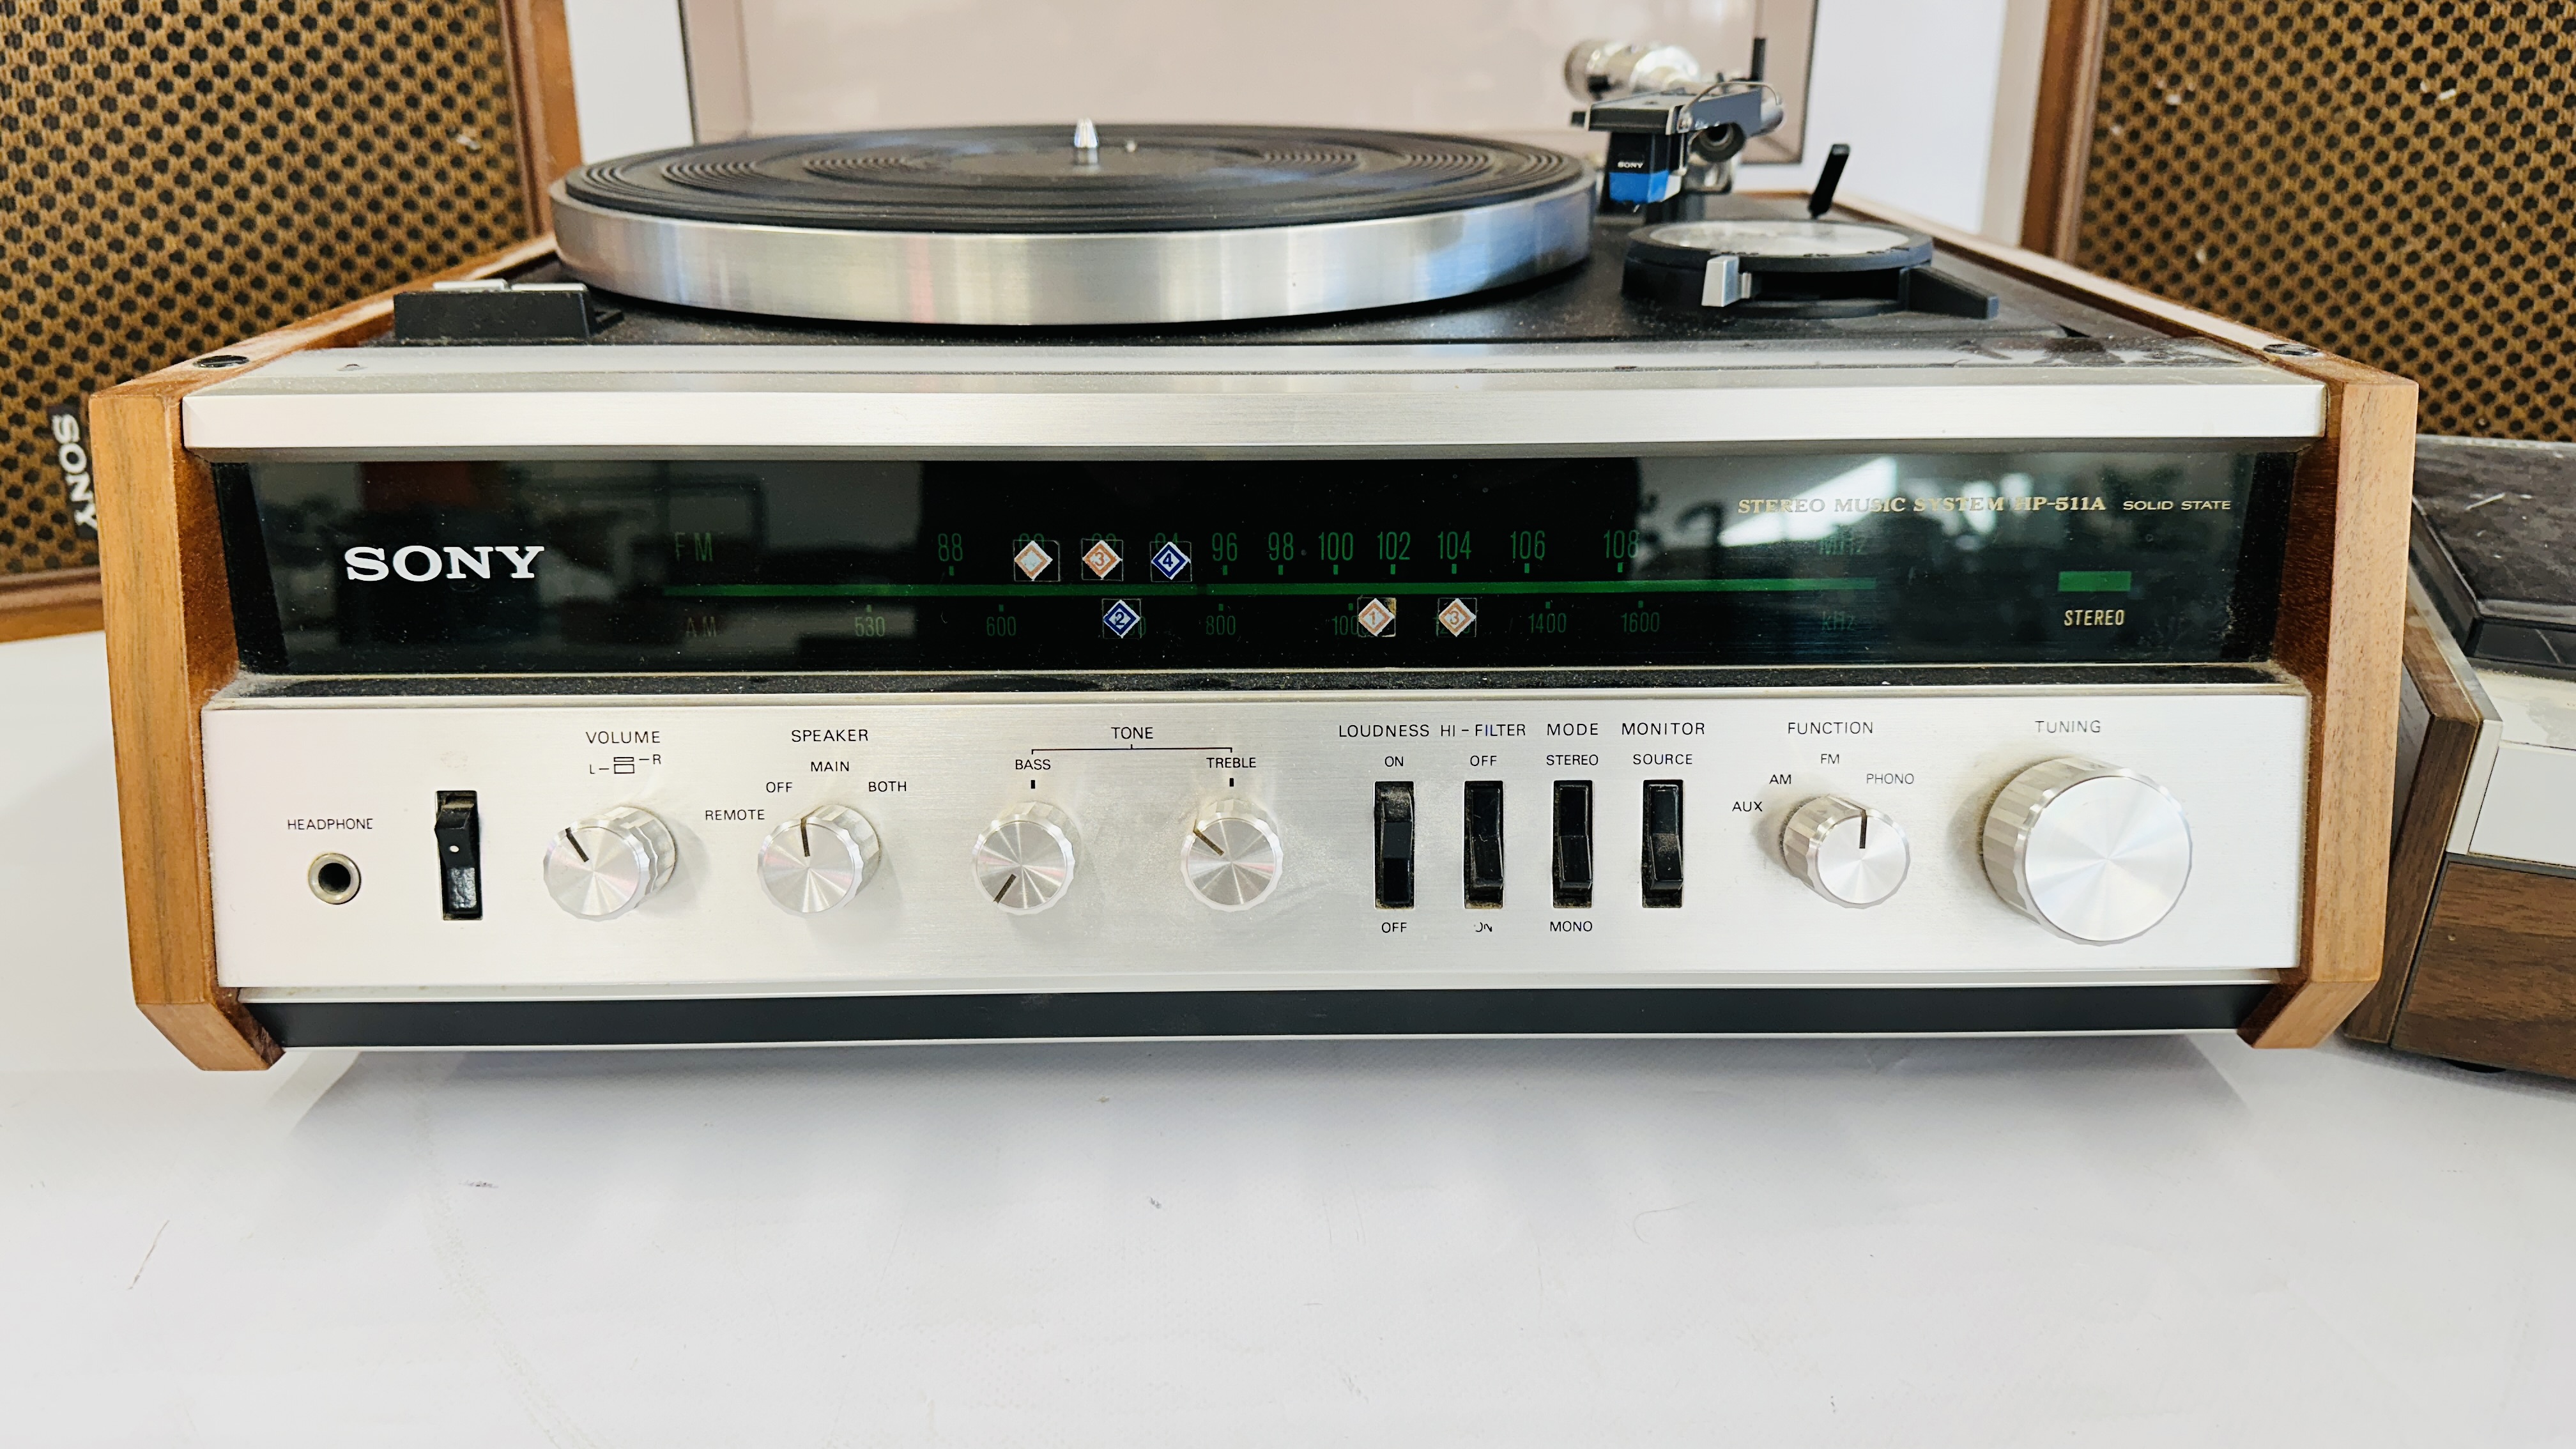 RETRO SONY STEREO MUSIC SYSTEM MODEL HP-511A COMPLETE WITH SONY SS-510 SPEAKER SYSTEM AND SONY - Image 9 of 9